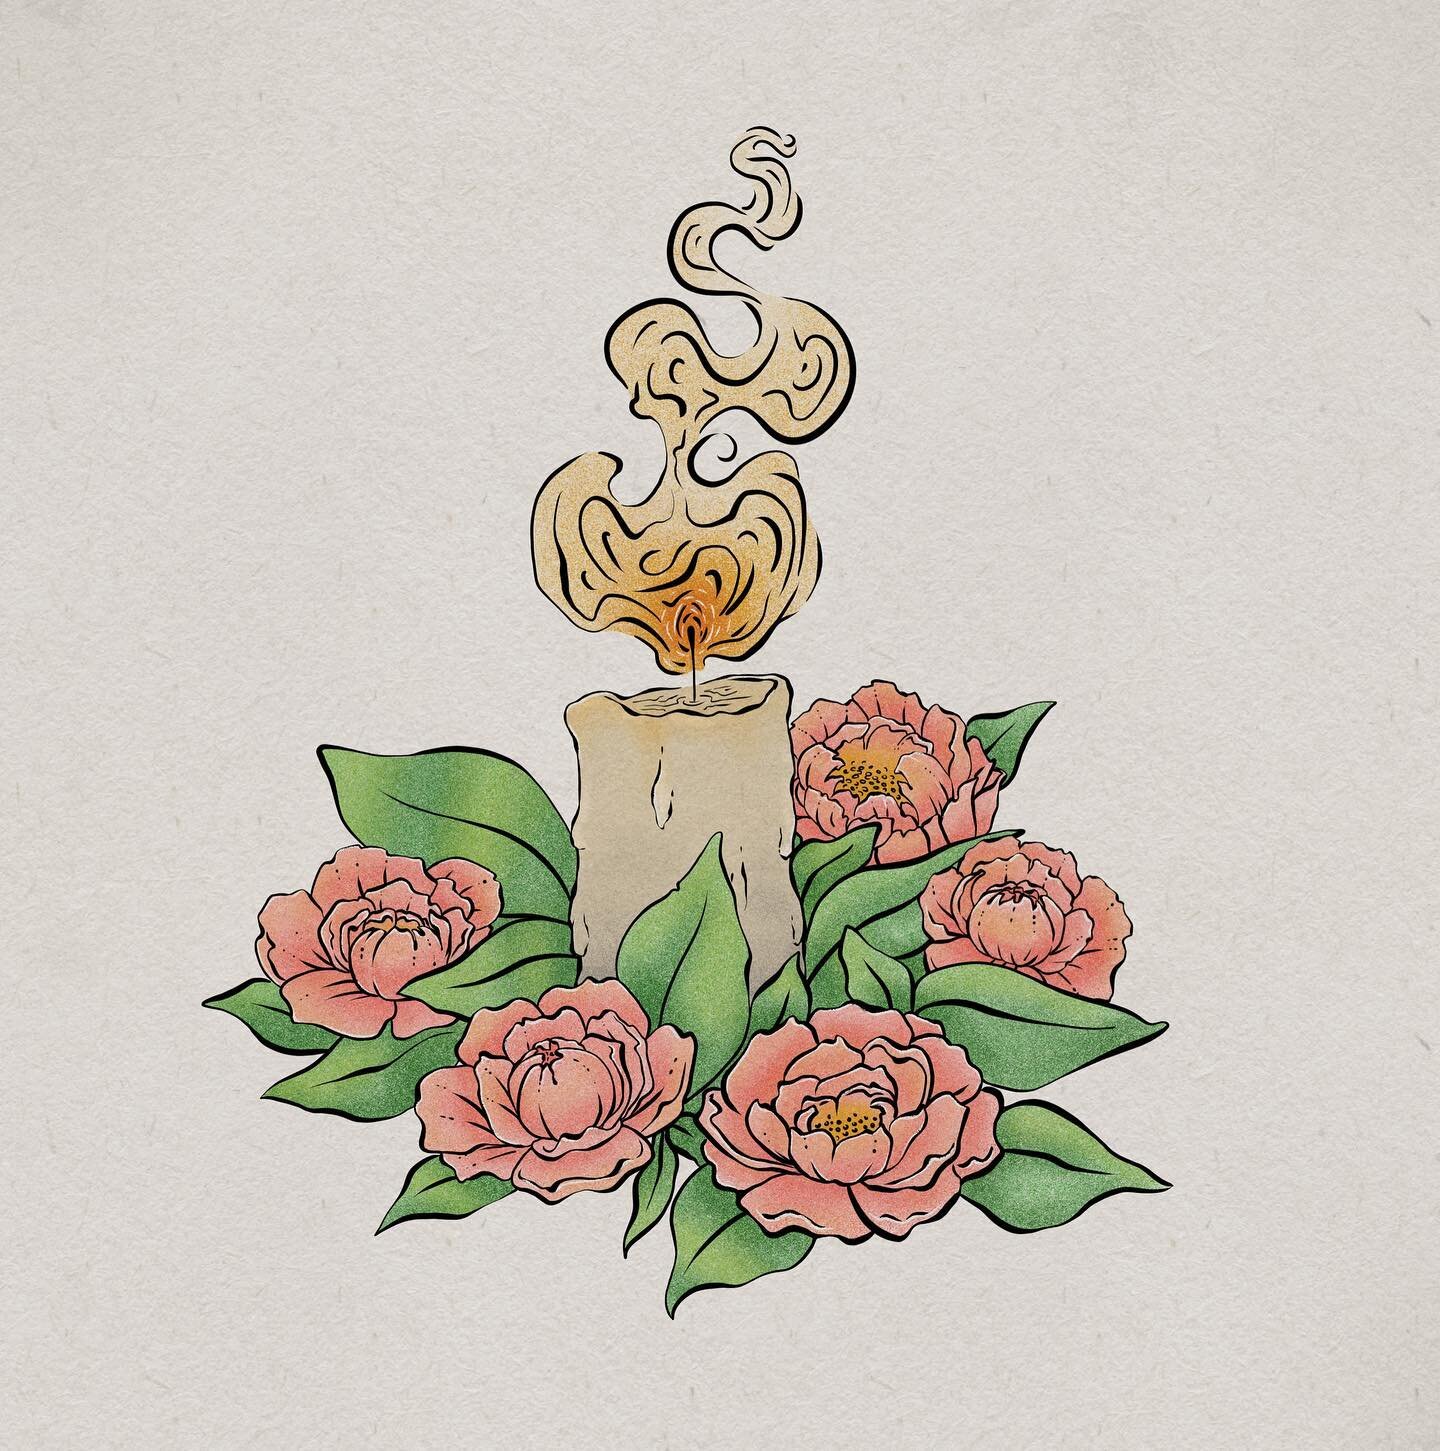 🕯🌿🌺 
Candlelit 

#candlelit #peonies #candlelight #procreateart #digitalillustration #autumn #skrzyniaart #thewickedwitchart #allhallowseve